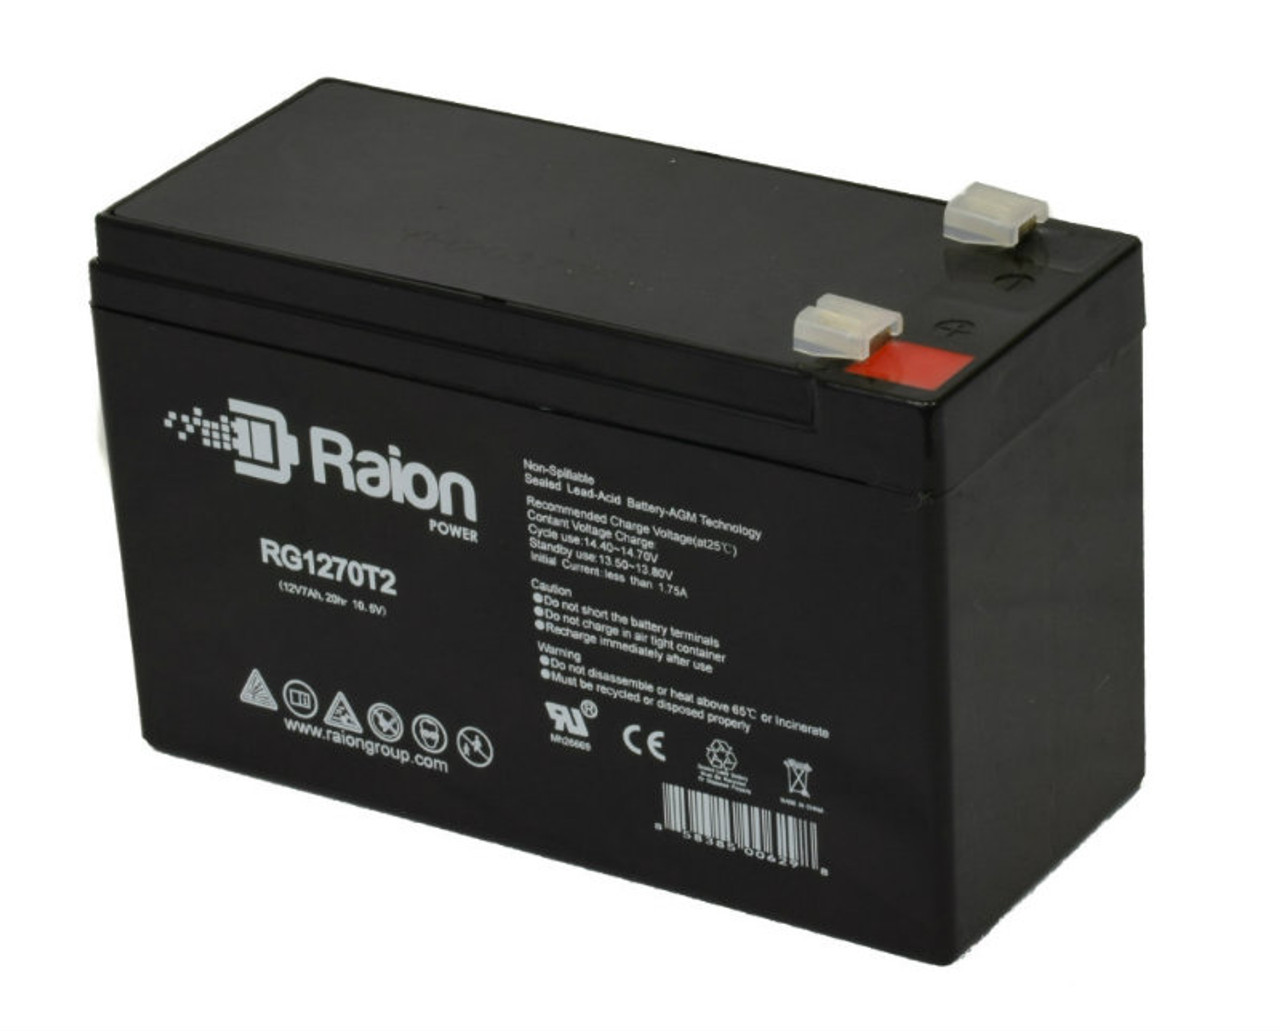 Raion Power RG1270T2 12V 7Ah Rechargeable Battery for Ocean NP7-12